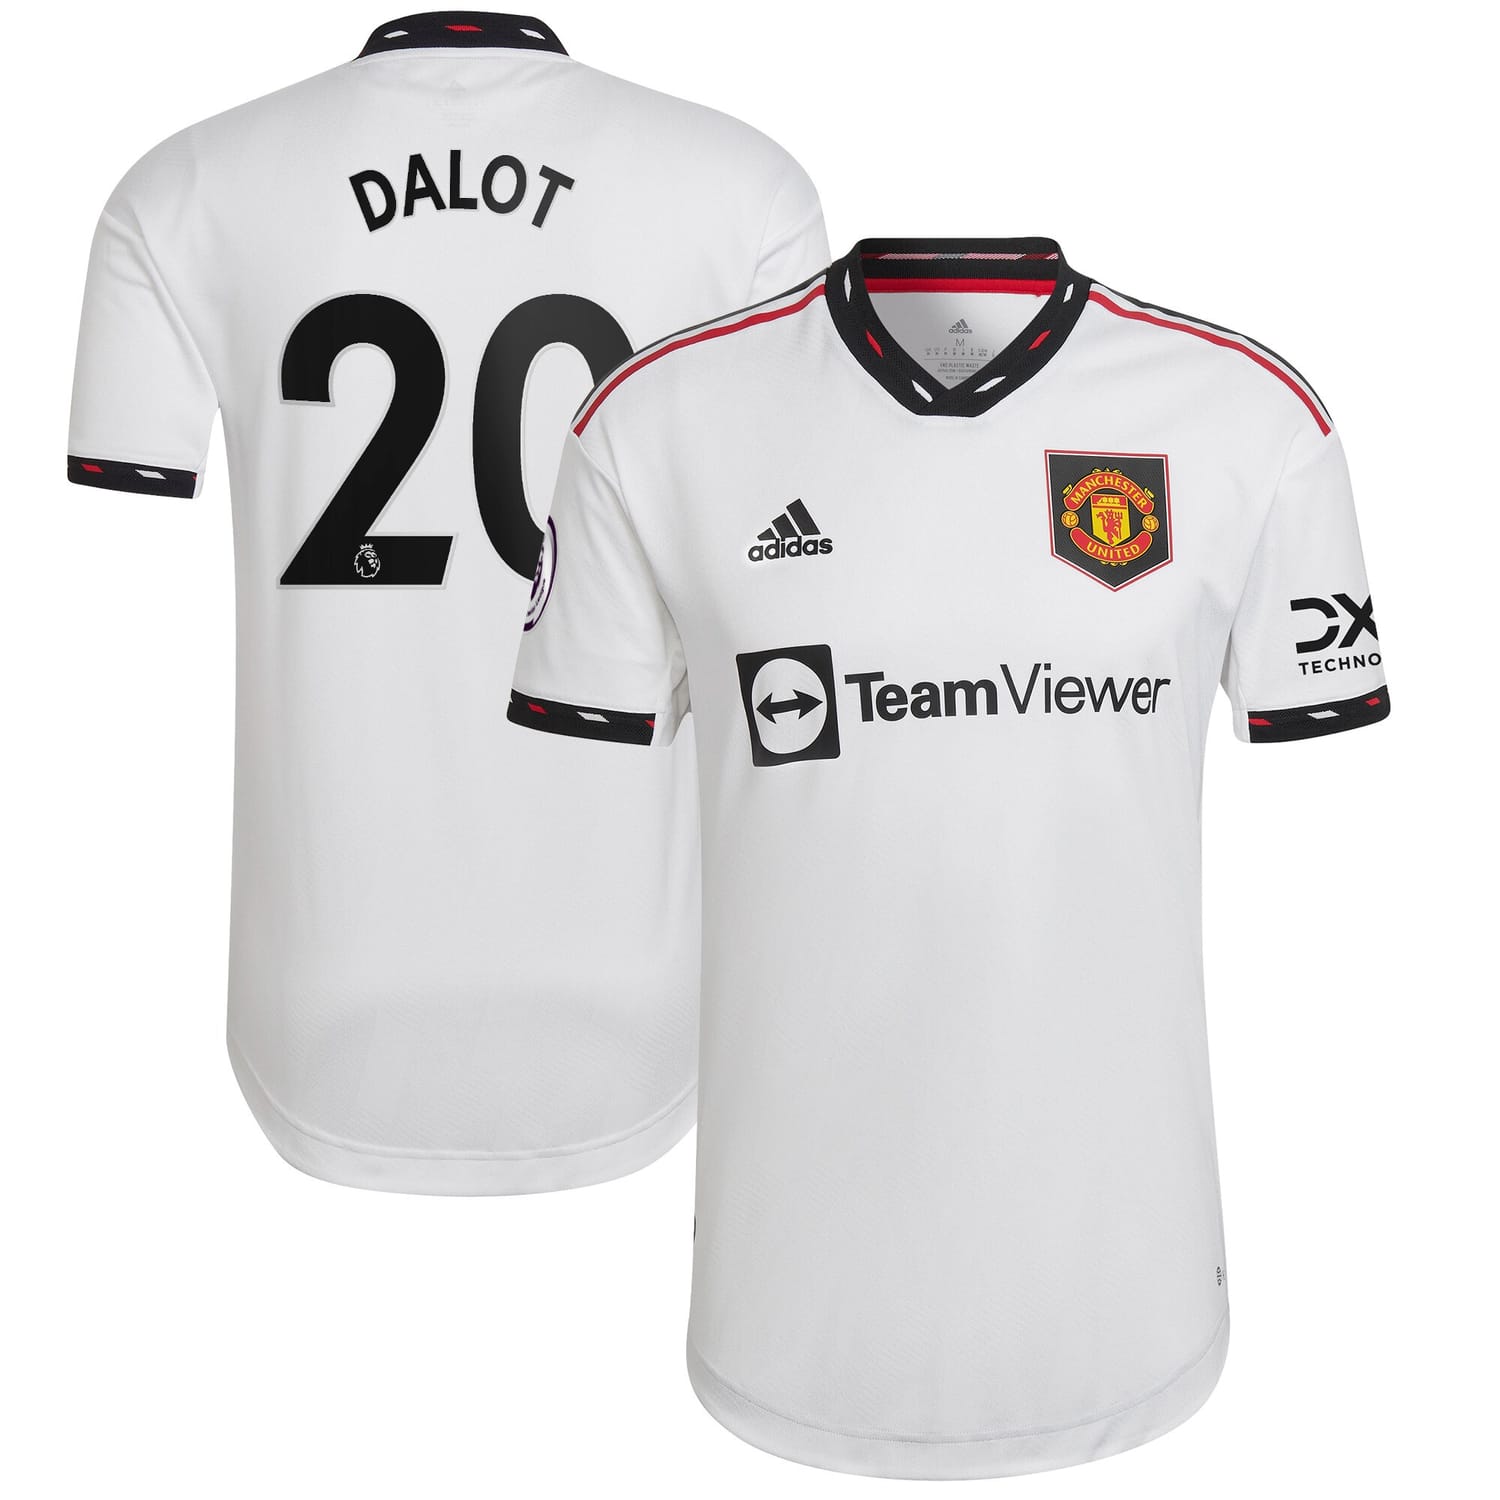 Premier League Manchester United Away Authentic Jersey Shirt White 2022-23 player Diogo Dalot printing for Men